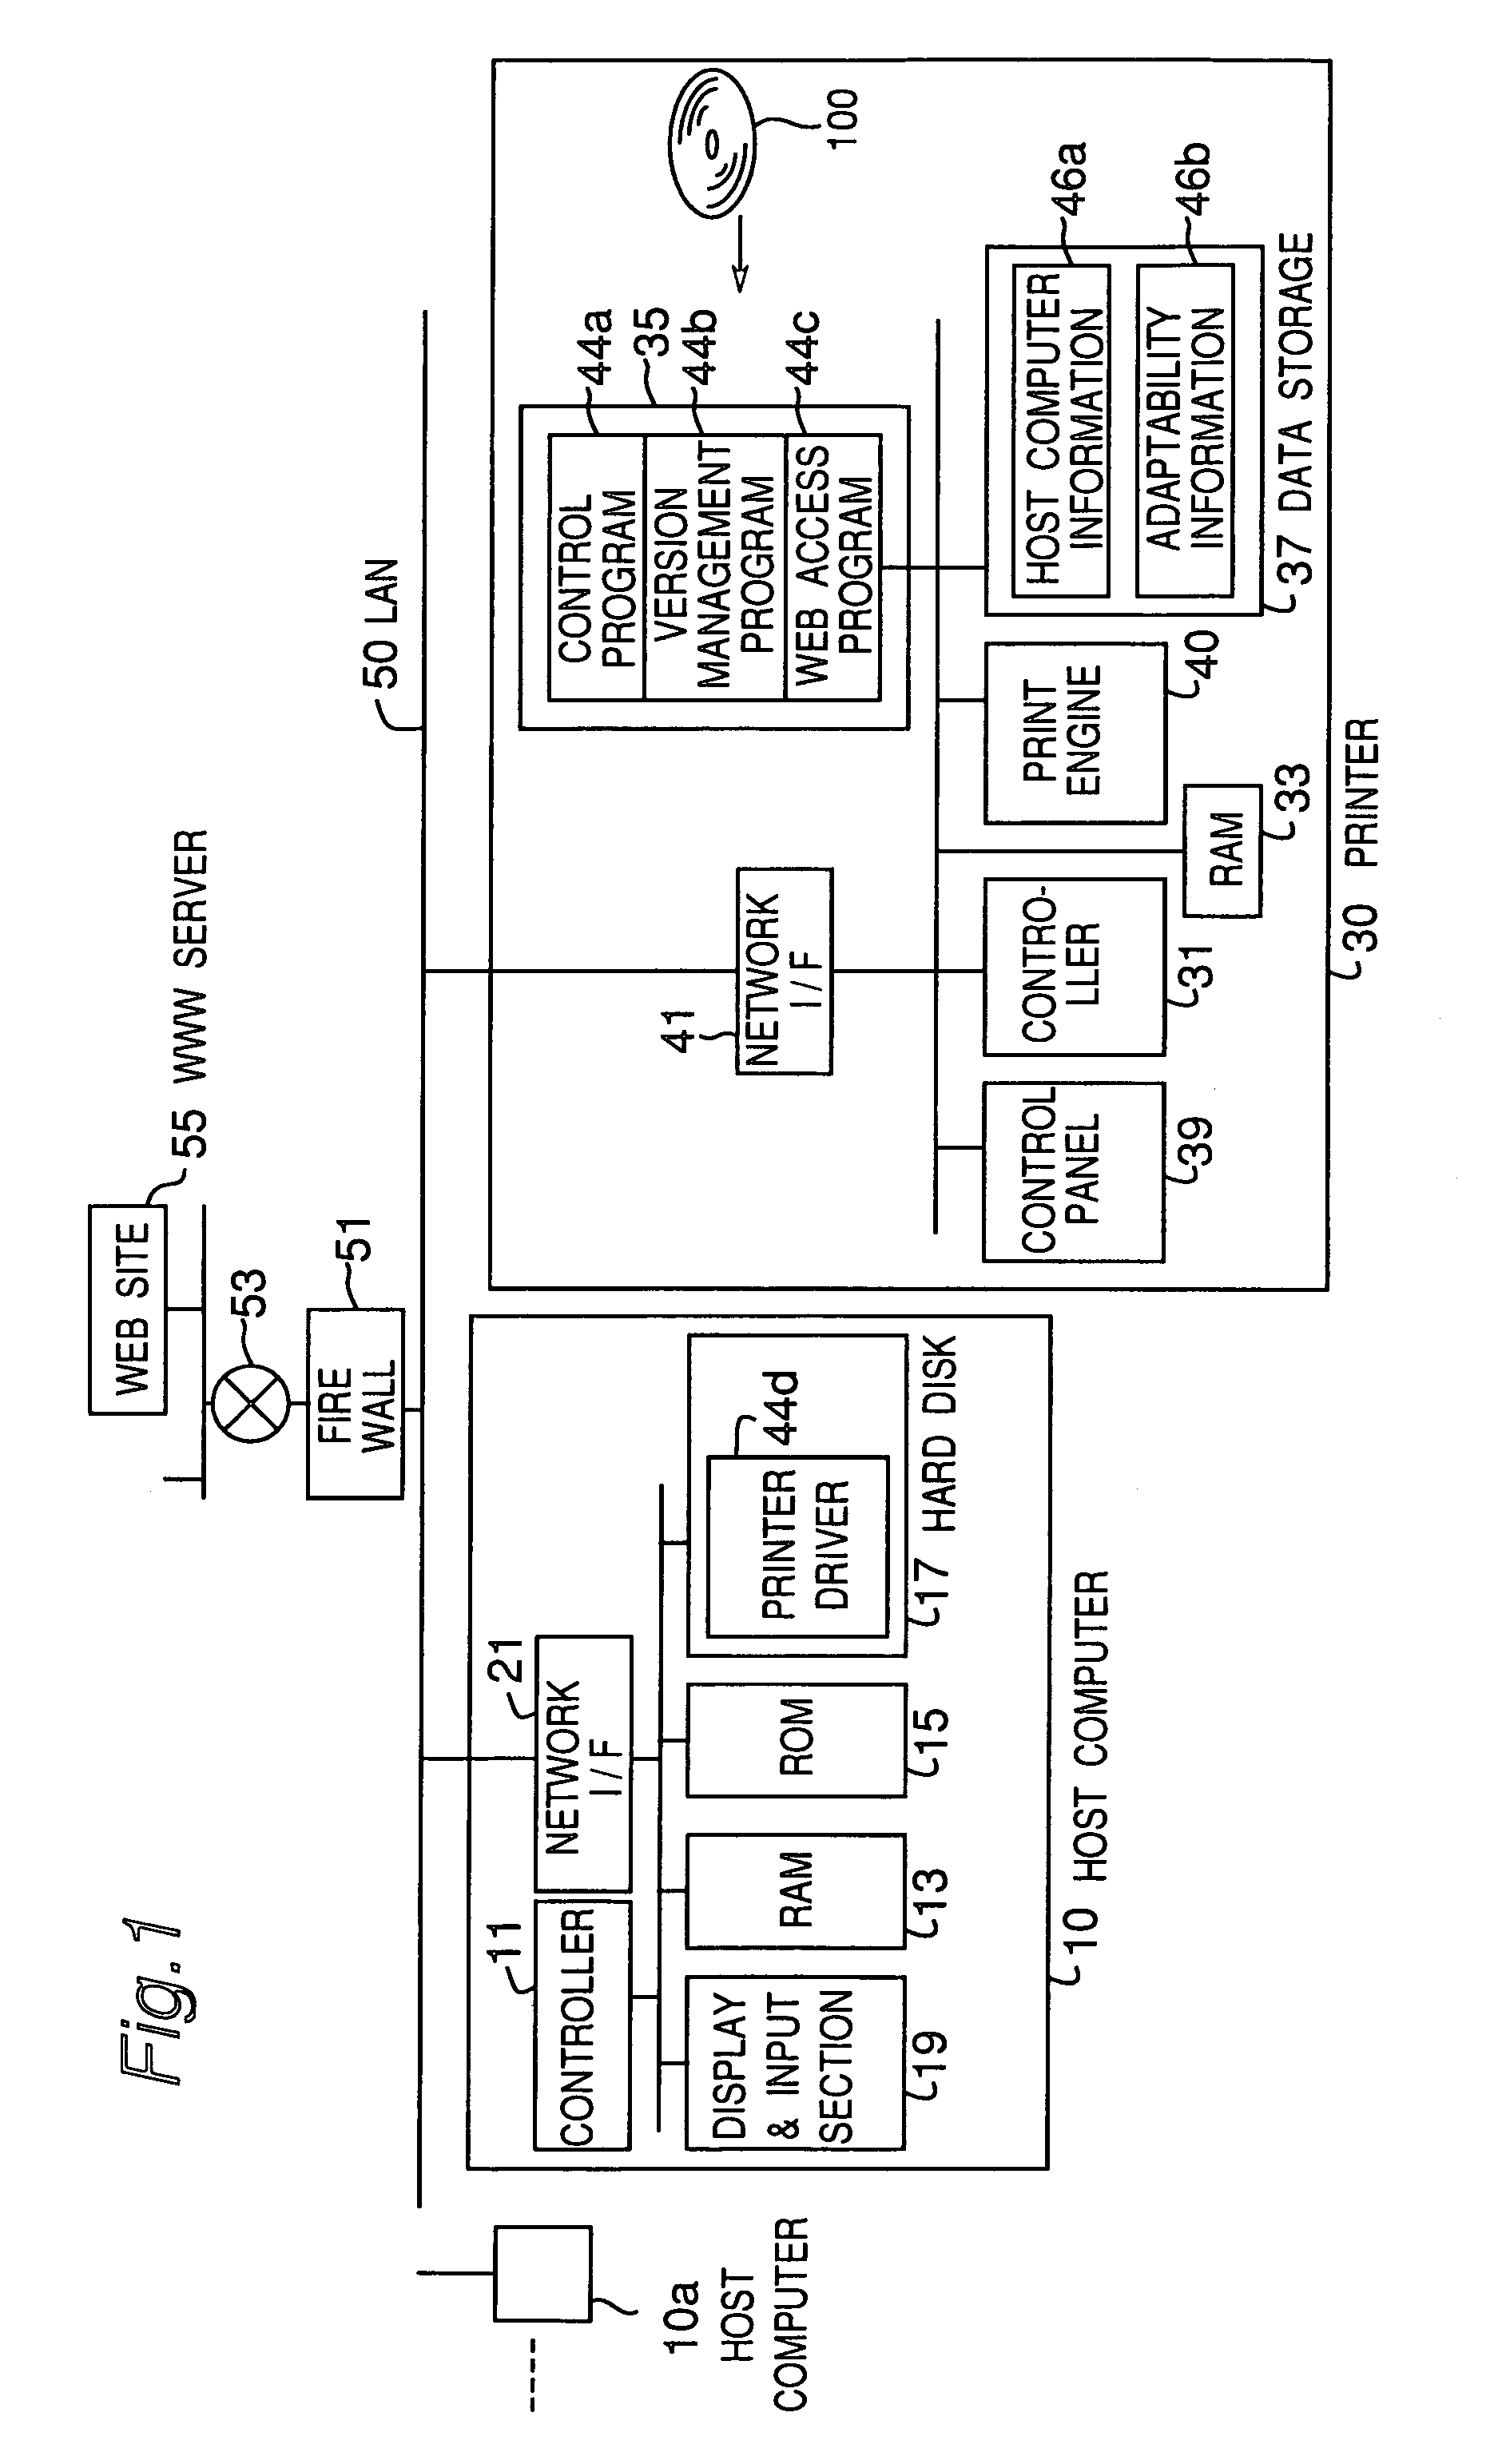 Management device and method of print system for updating software programs installed in the print system